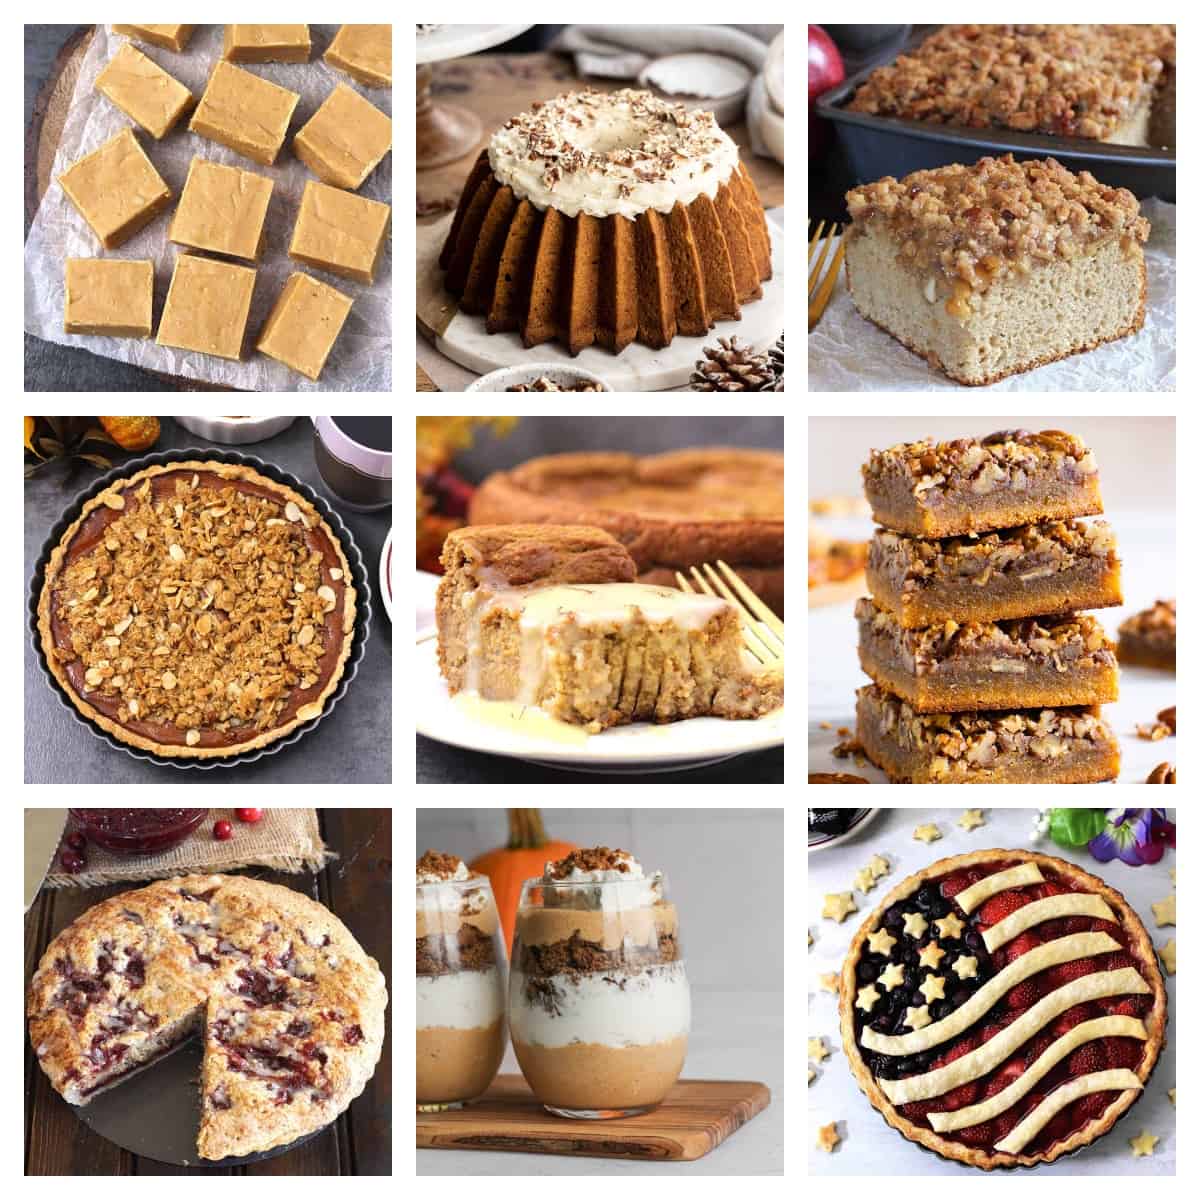 Best Thanksgiving dessert recipes from pumpkin pie to cake, cookies, bars, tarts, crisps, pudding, holiday themed desserts.